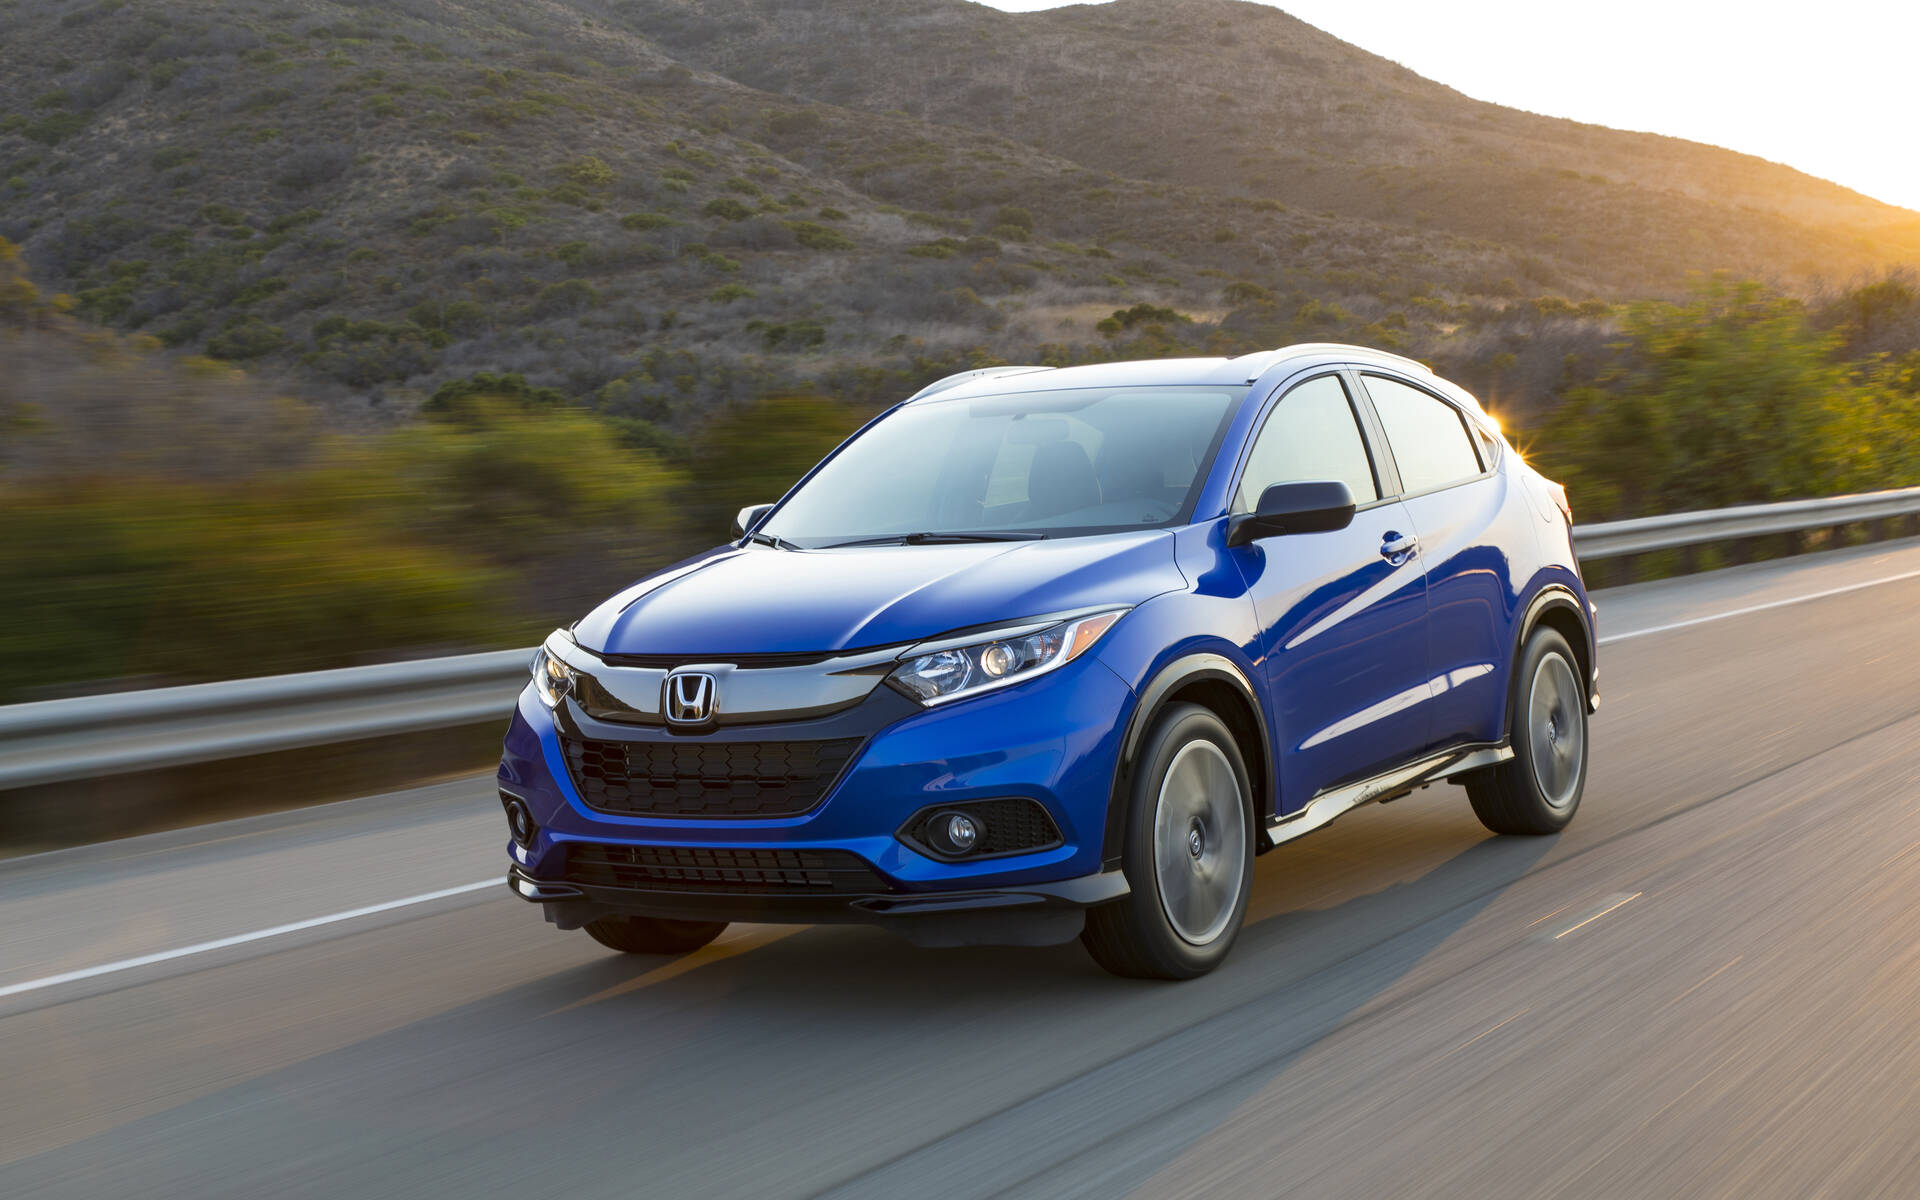 21 Honda Hr V News Reviews Picture Galleries And Videos The Car Guide